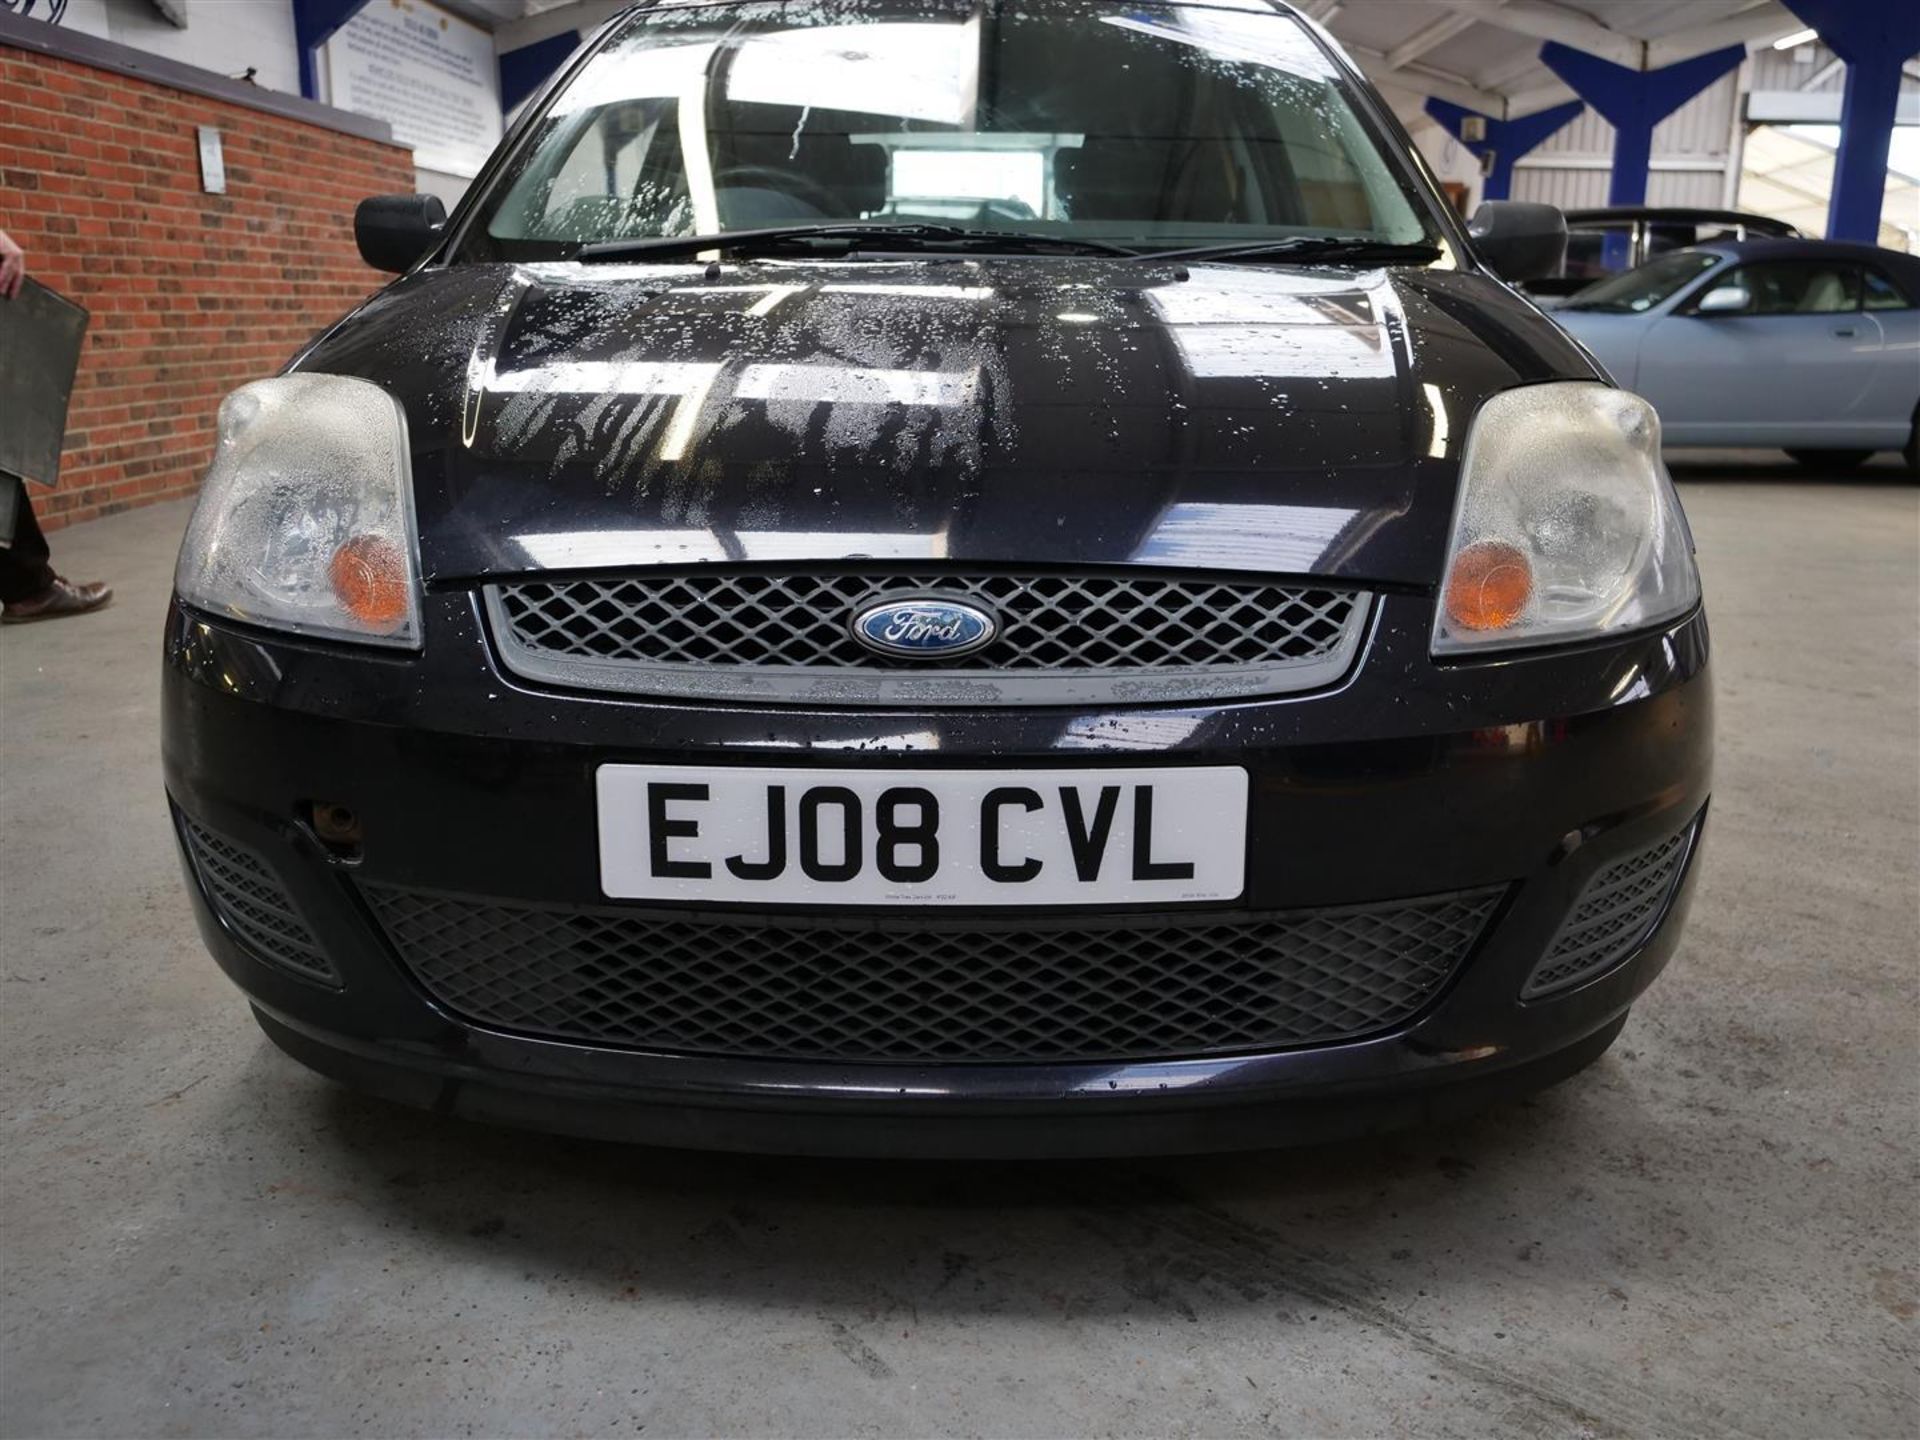 08 08 Ford Fiesta Style - Image 2 of 20